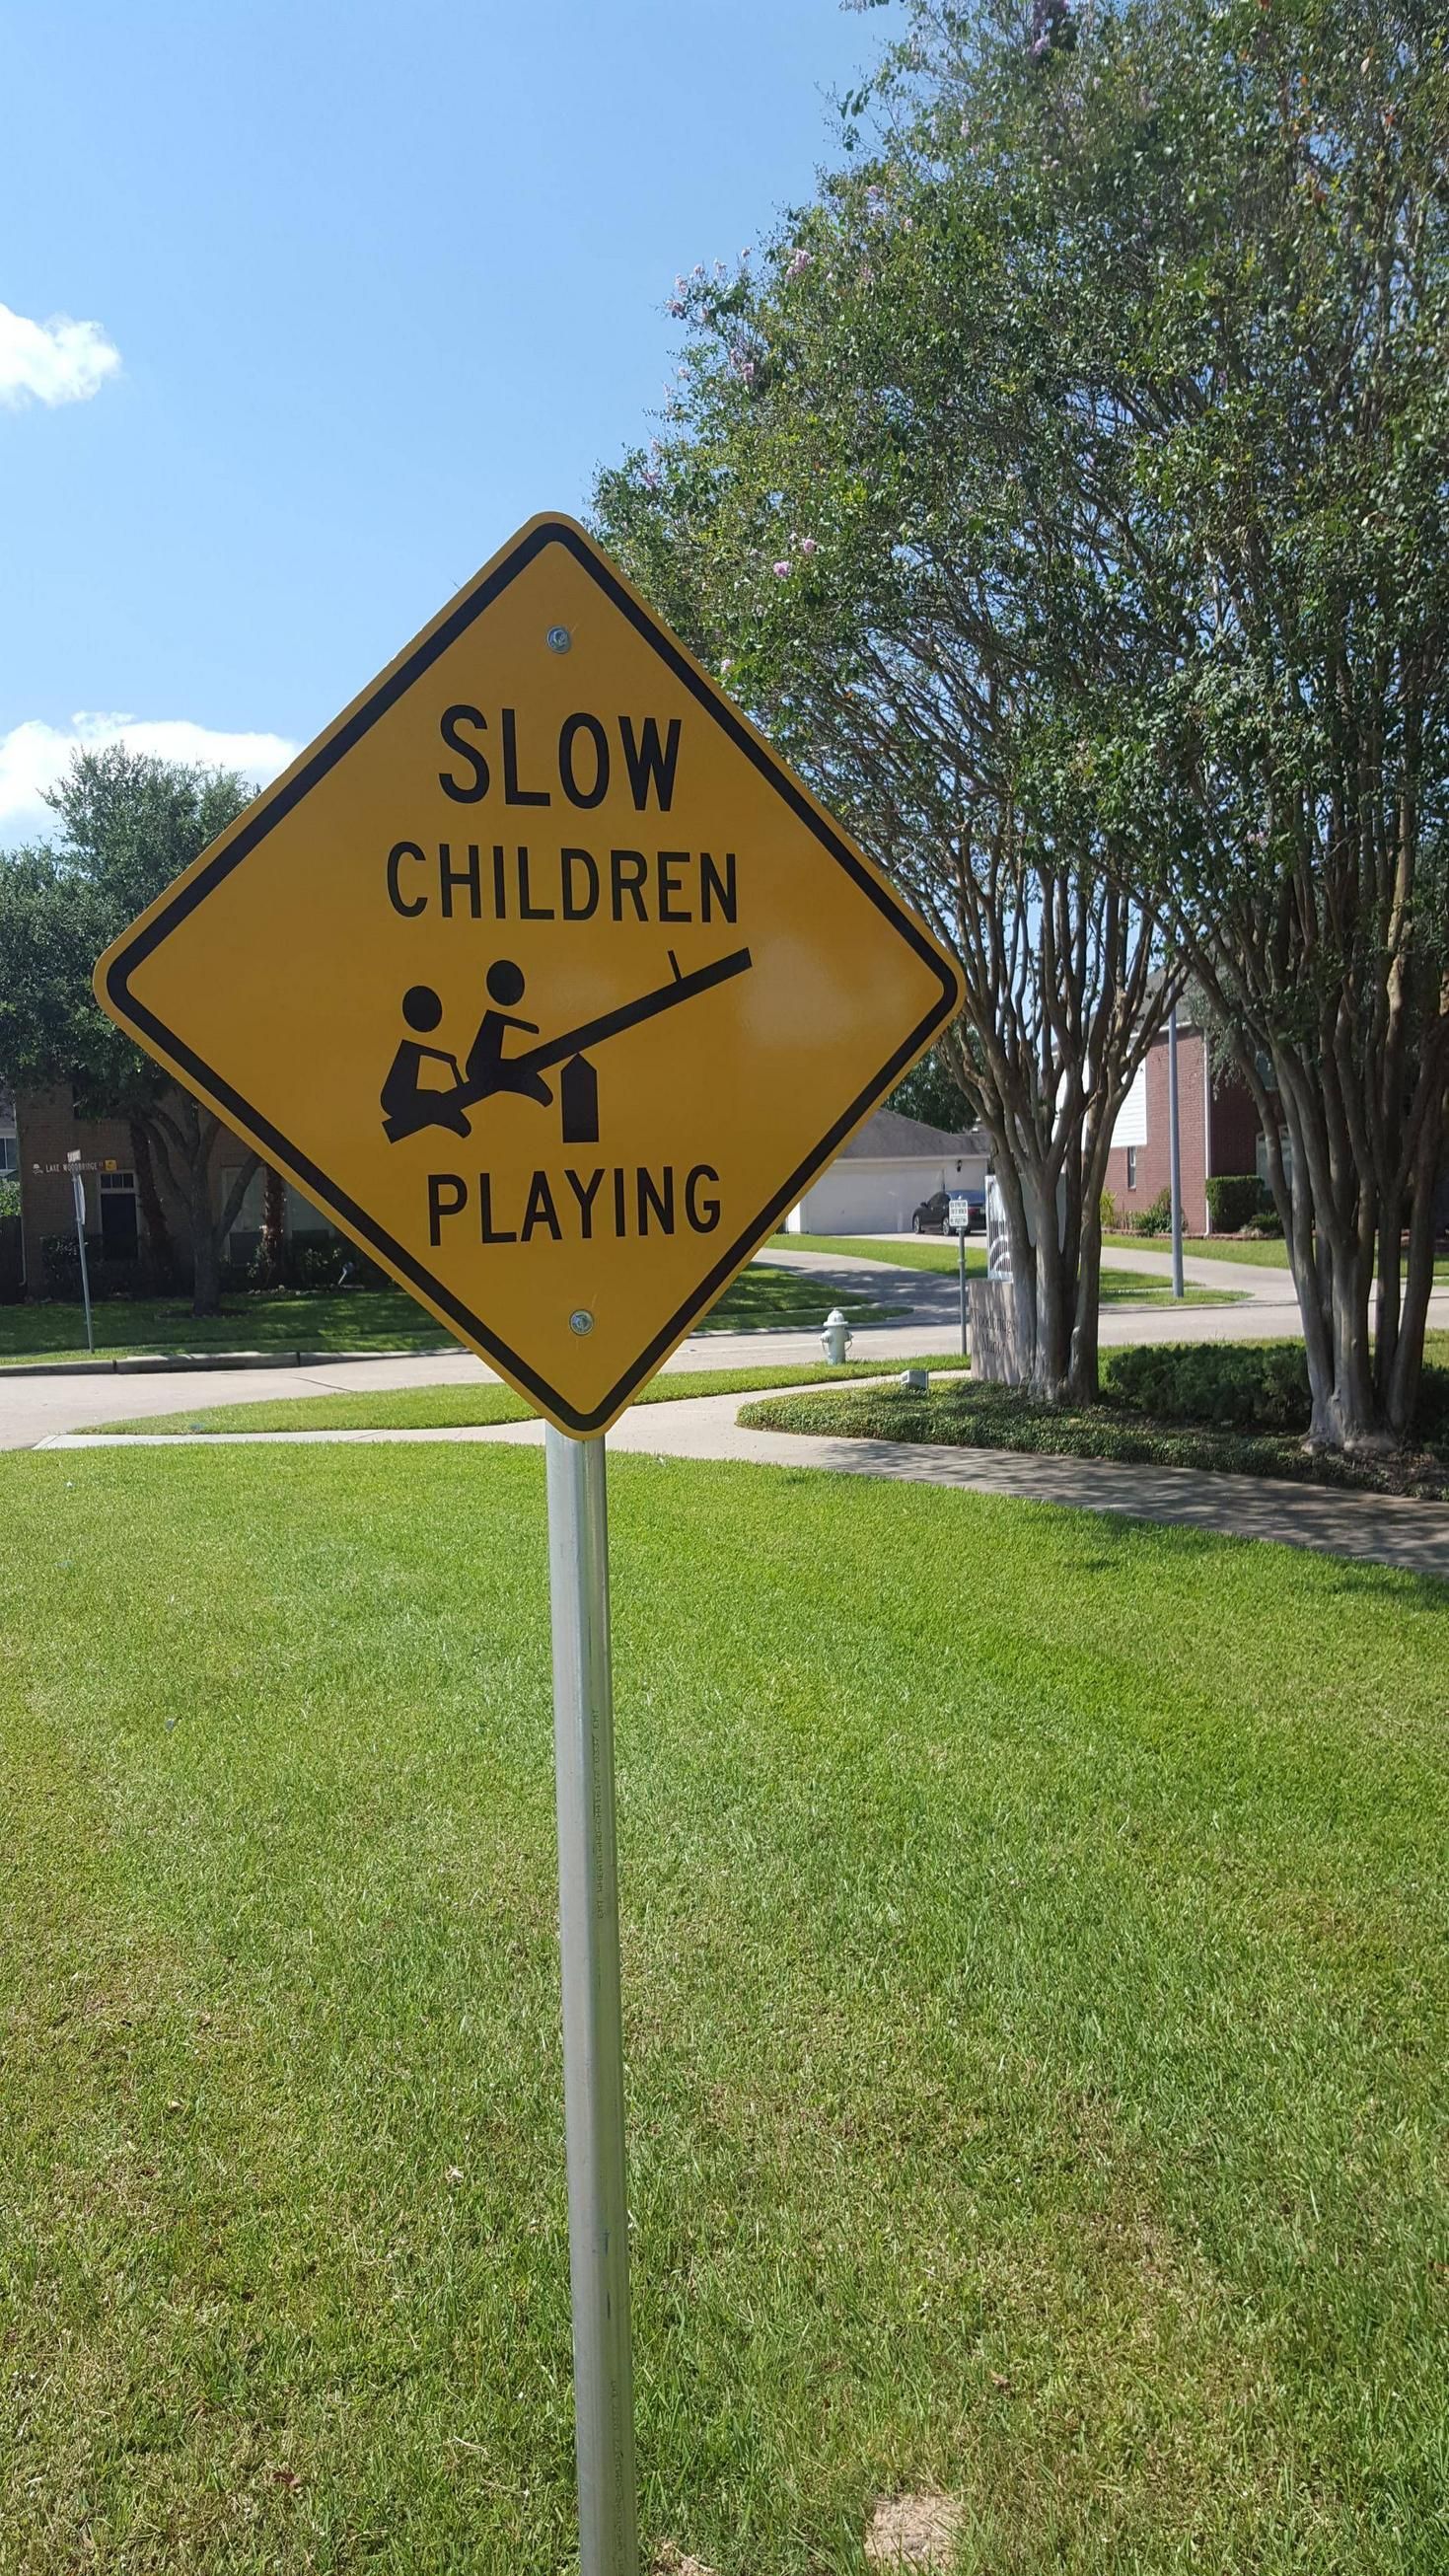 They just put up this sign in my neighborhood and I can't stop laughing!